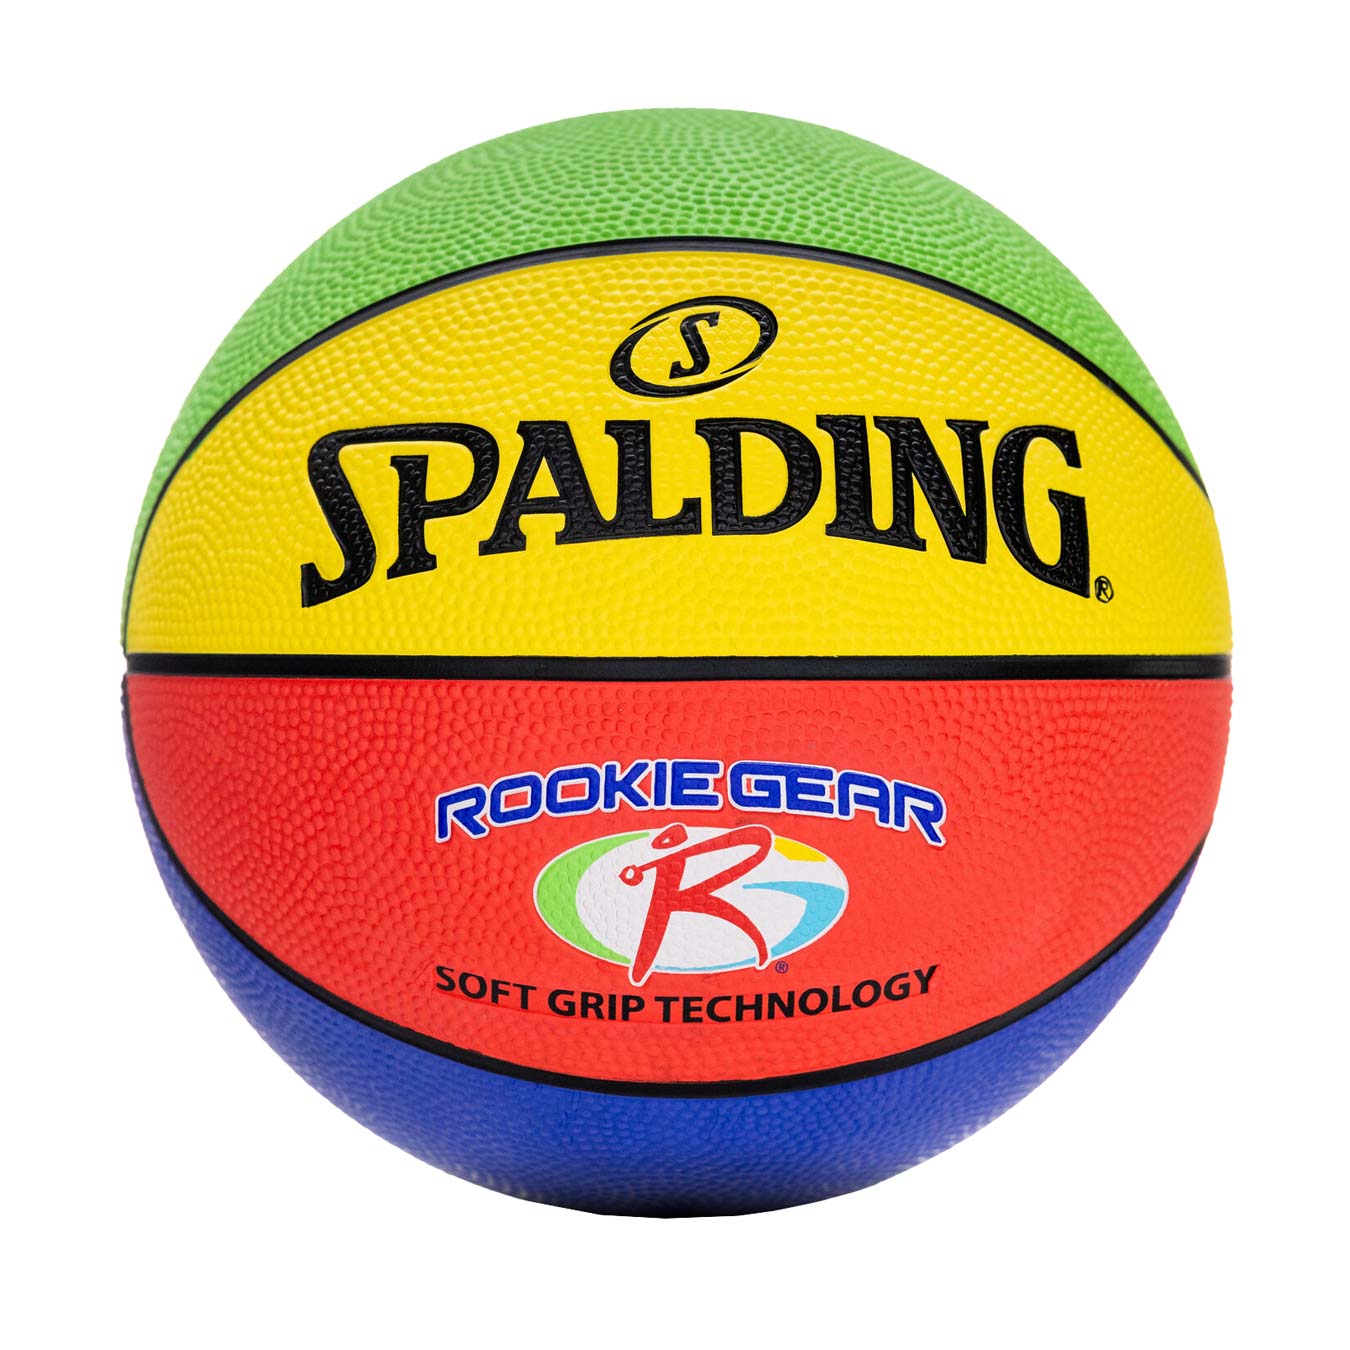 Spalding Rookie Gear Basketball Youth 5 - Multicolor - 27.5"